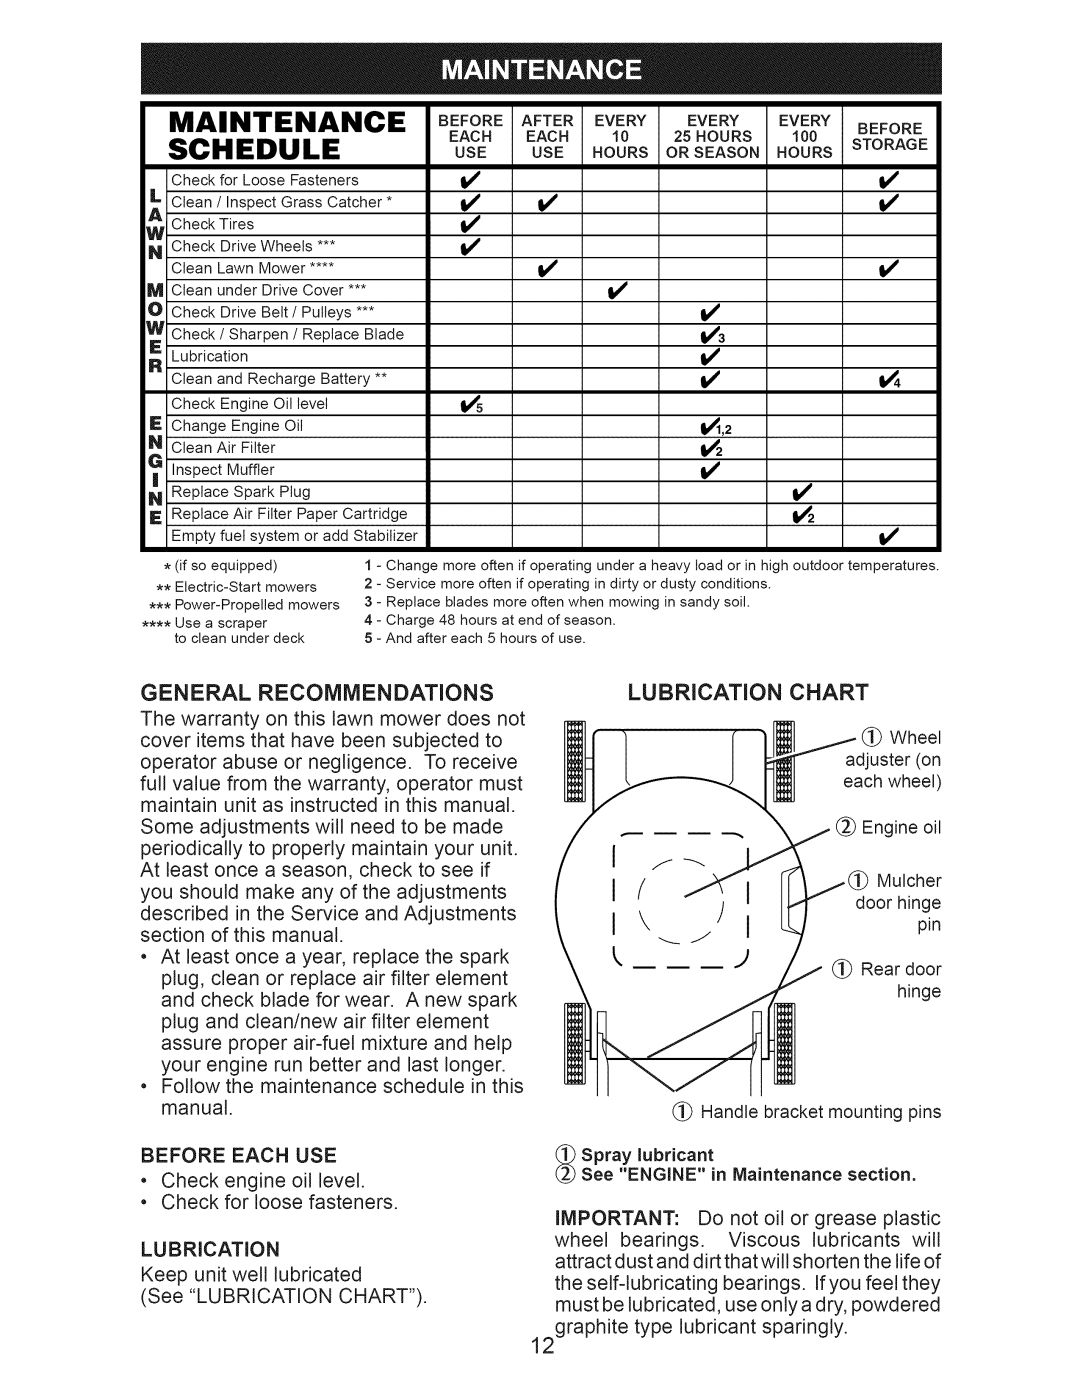 Craftsman 917.376404 owner manual Maintenance, Schedule, Use Hours 